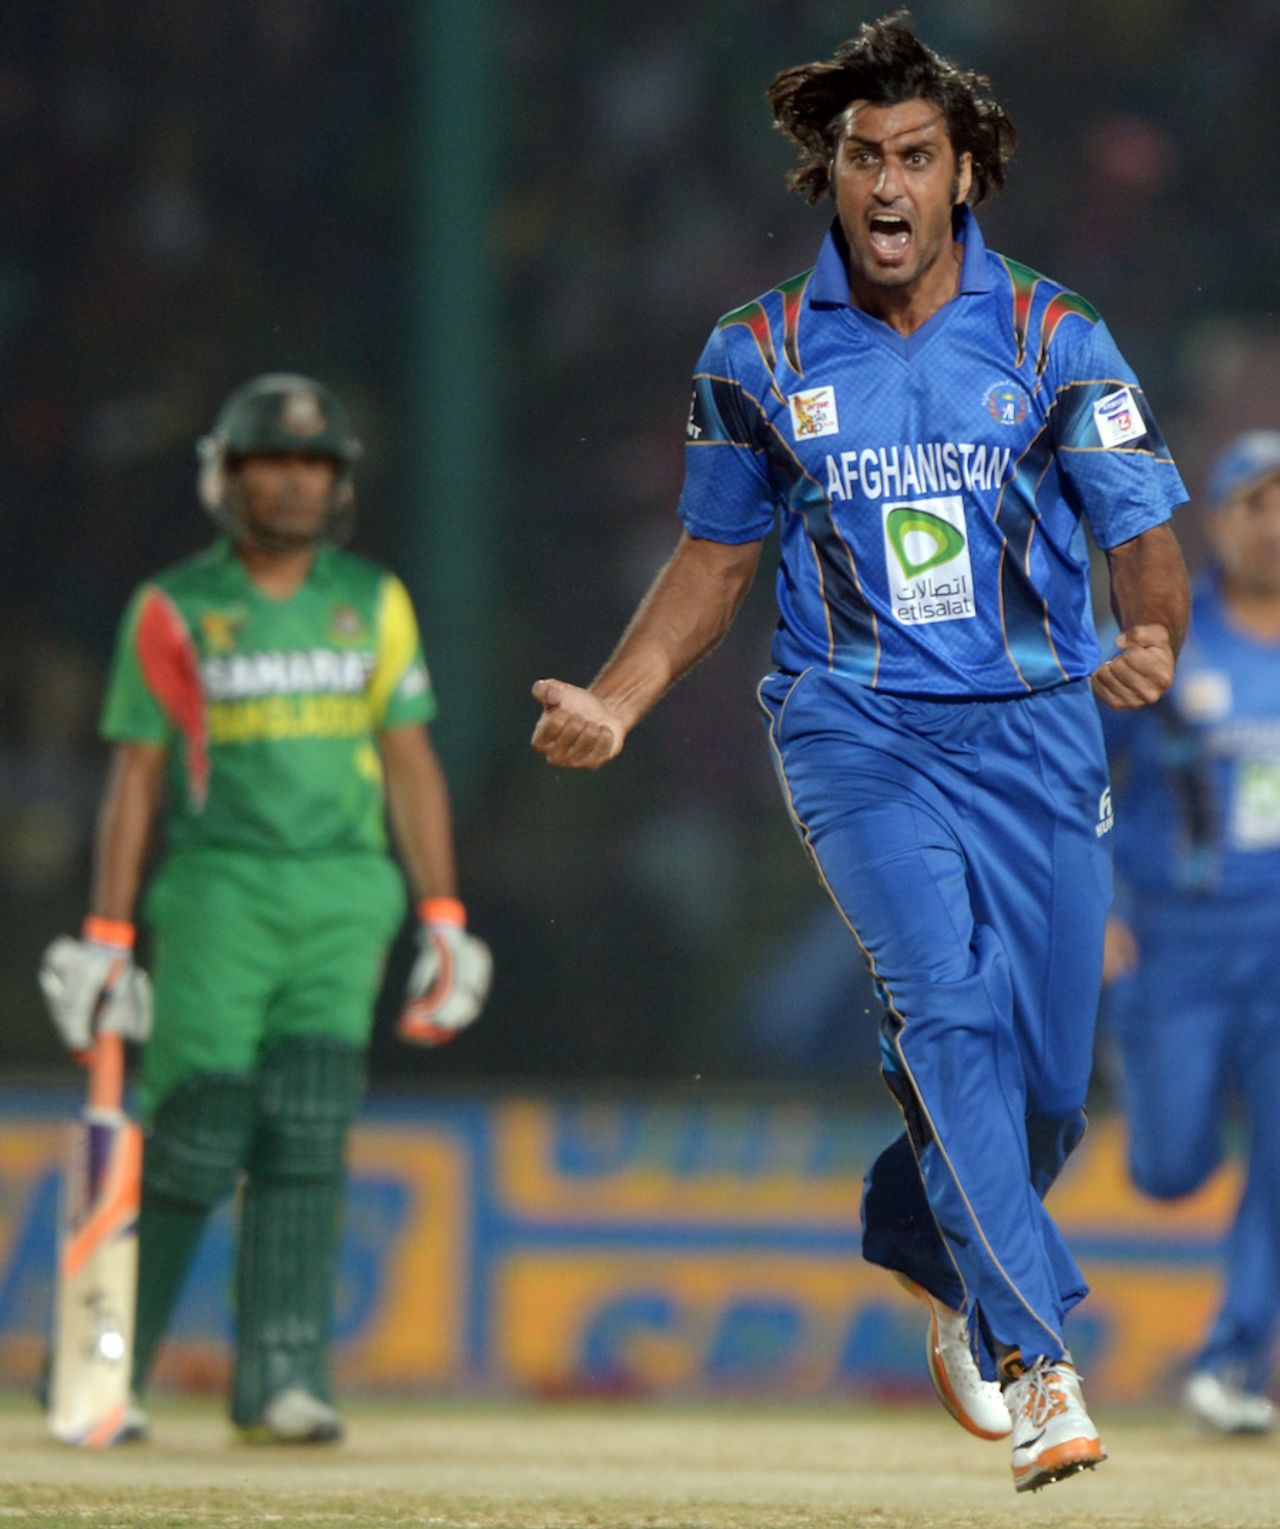 Shapoor Zadran picked up a wicket in his first over, Bangladesh v Afghanistan, Asia Cup, Fatullah, March 1, 2014